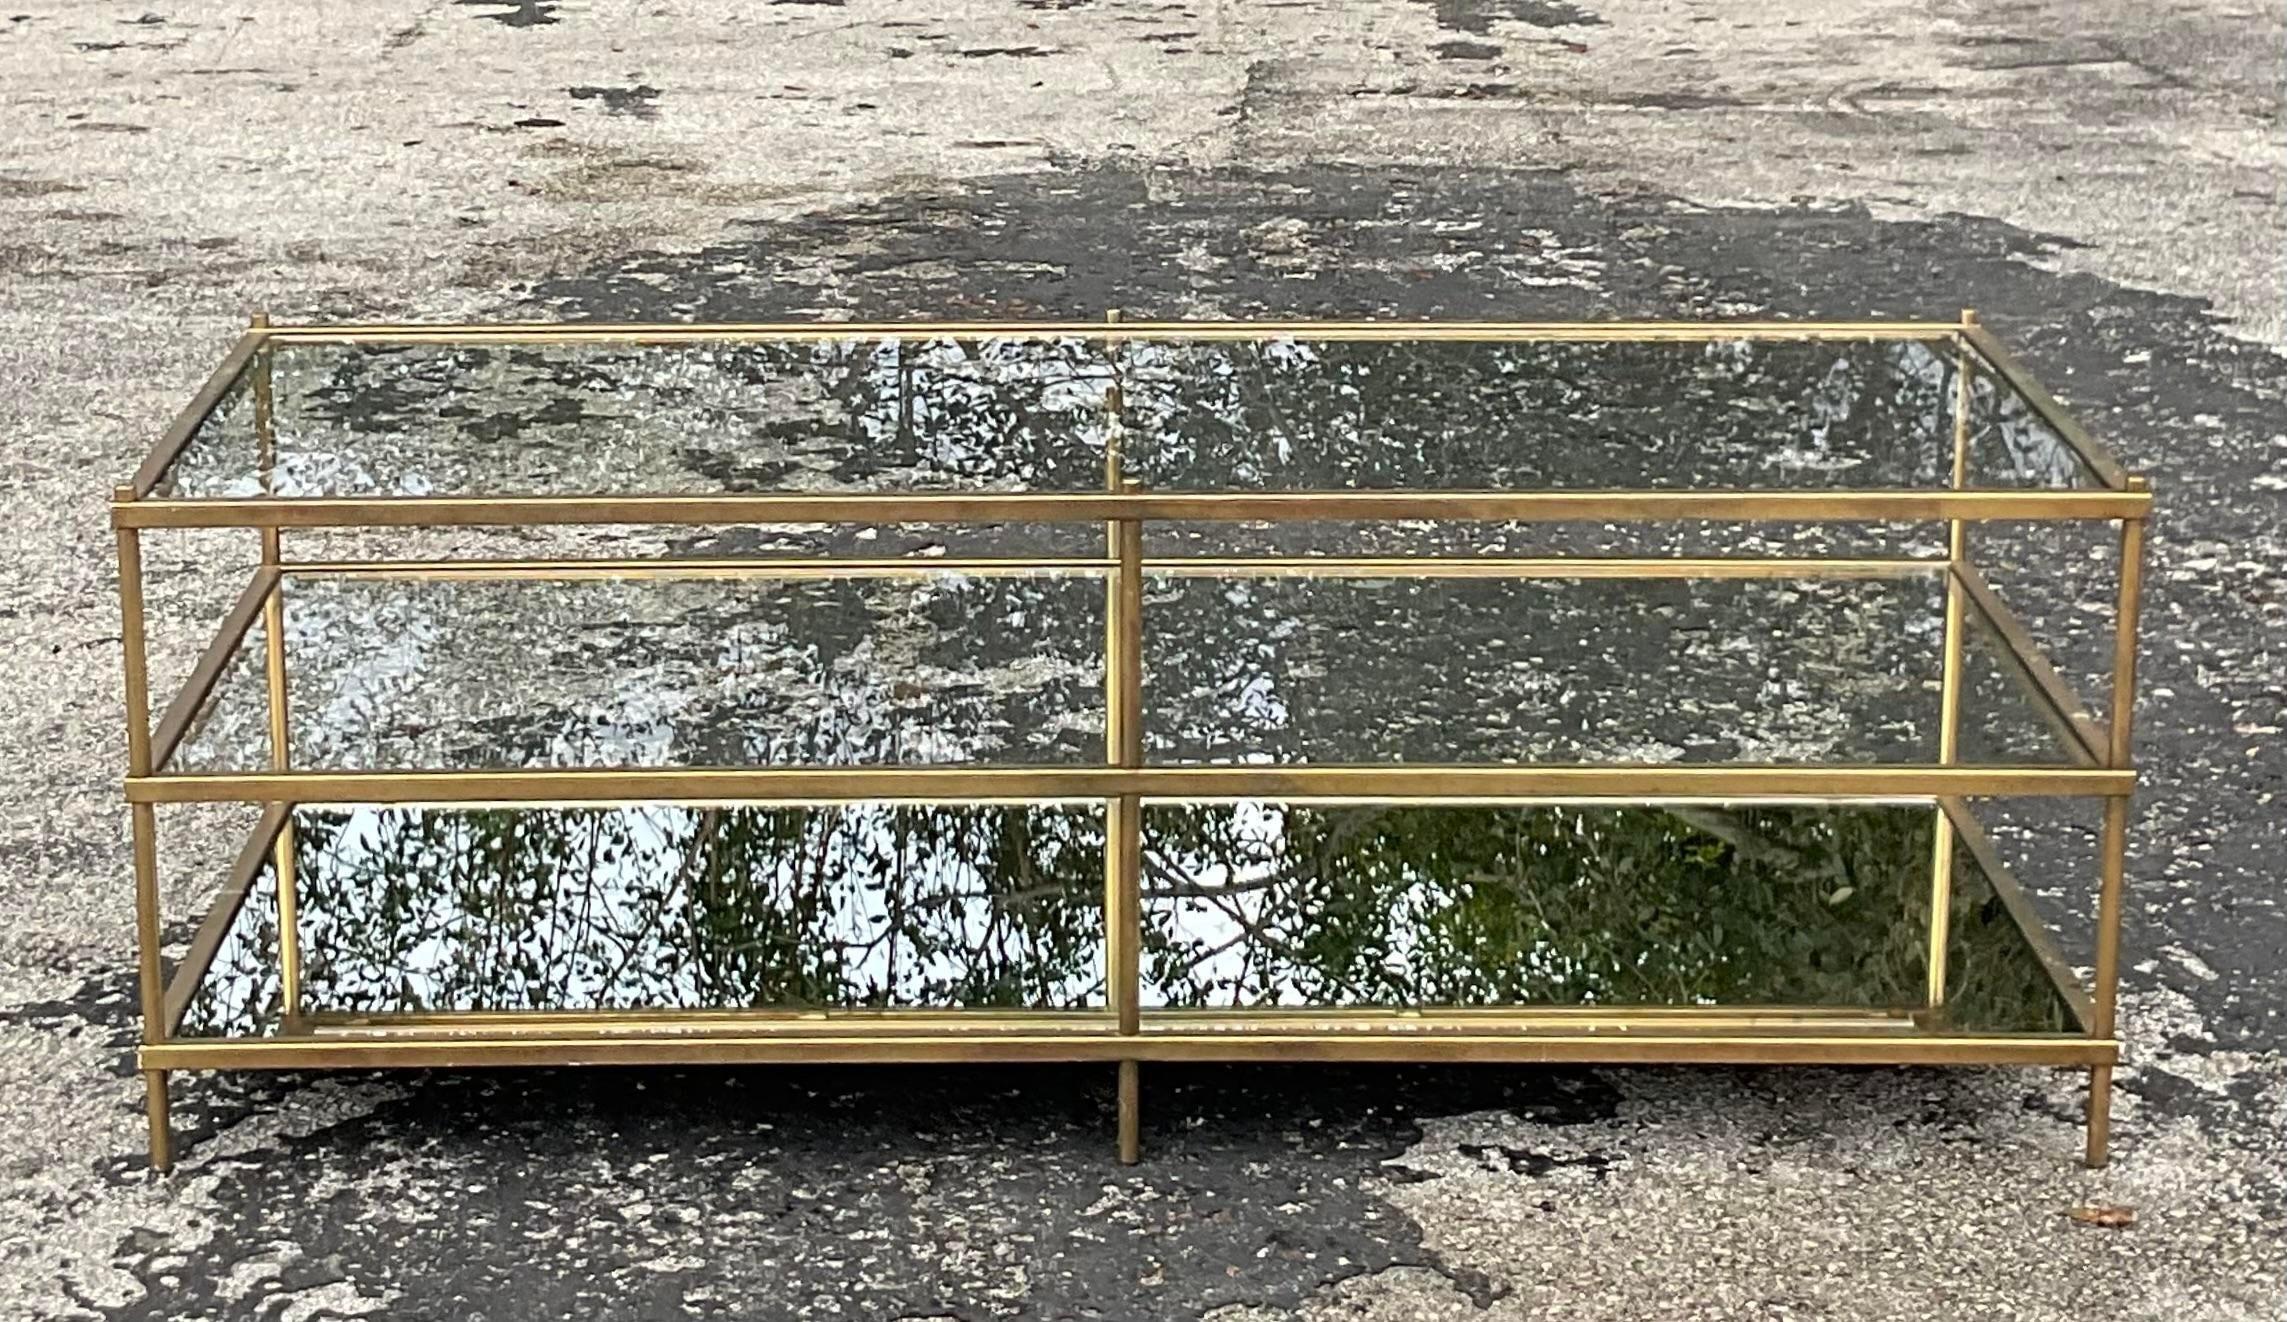 A fabulous vintage Regency coffee table. A chic burnished brass with inset glass shelves. Thr lowest level is a mirrored shelf. A chic and simple design. Acquired from a Palm Beach estate.